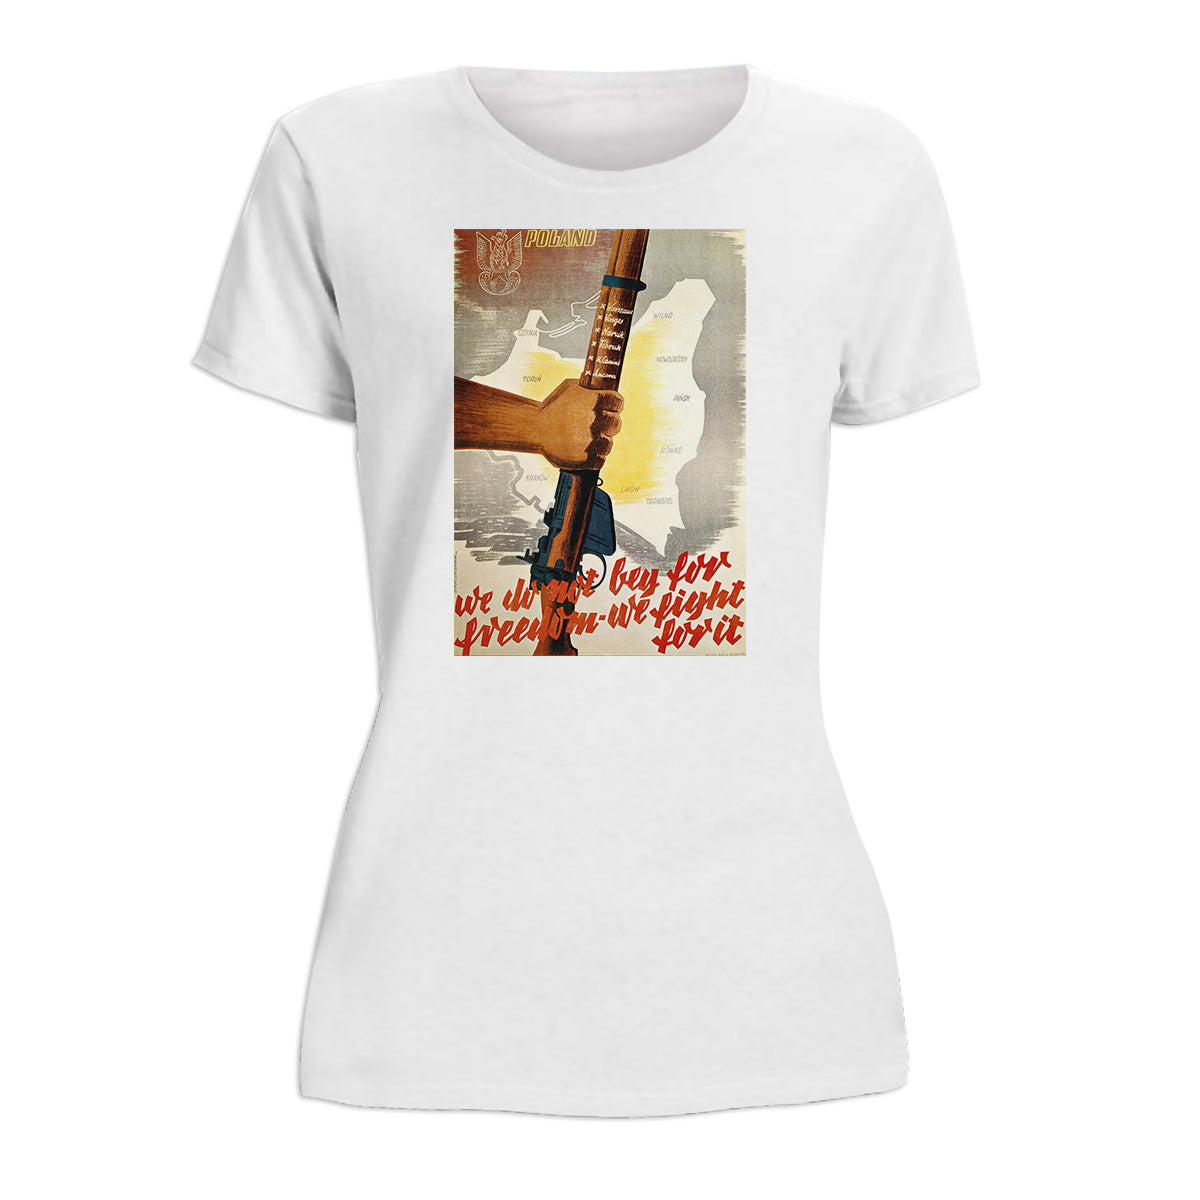 Vintage Poster Poland We Fight For Freedom Women's Short Sleeve Tshirt